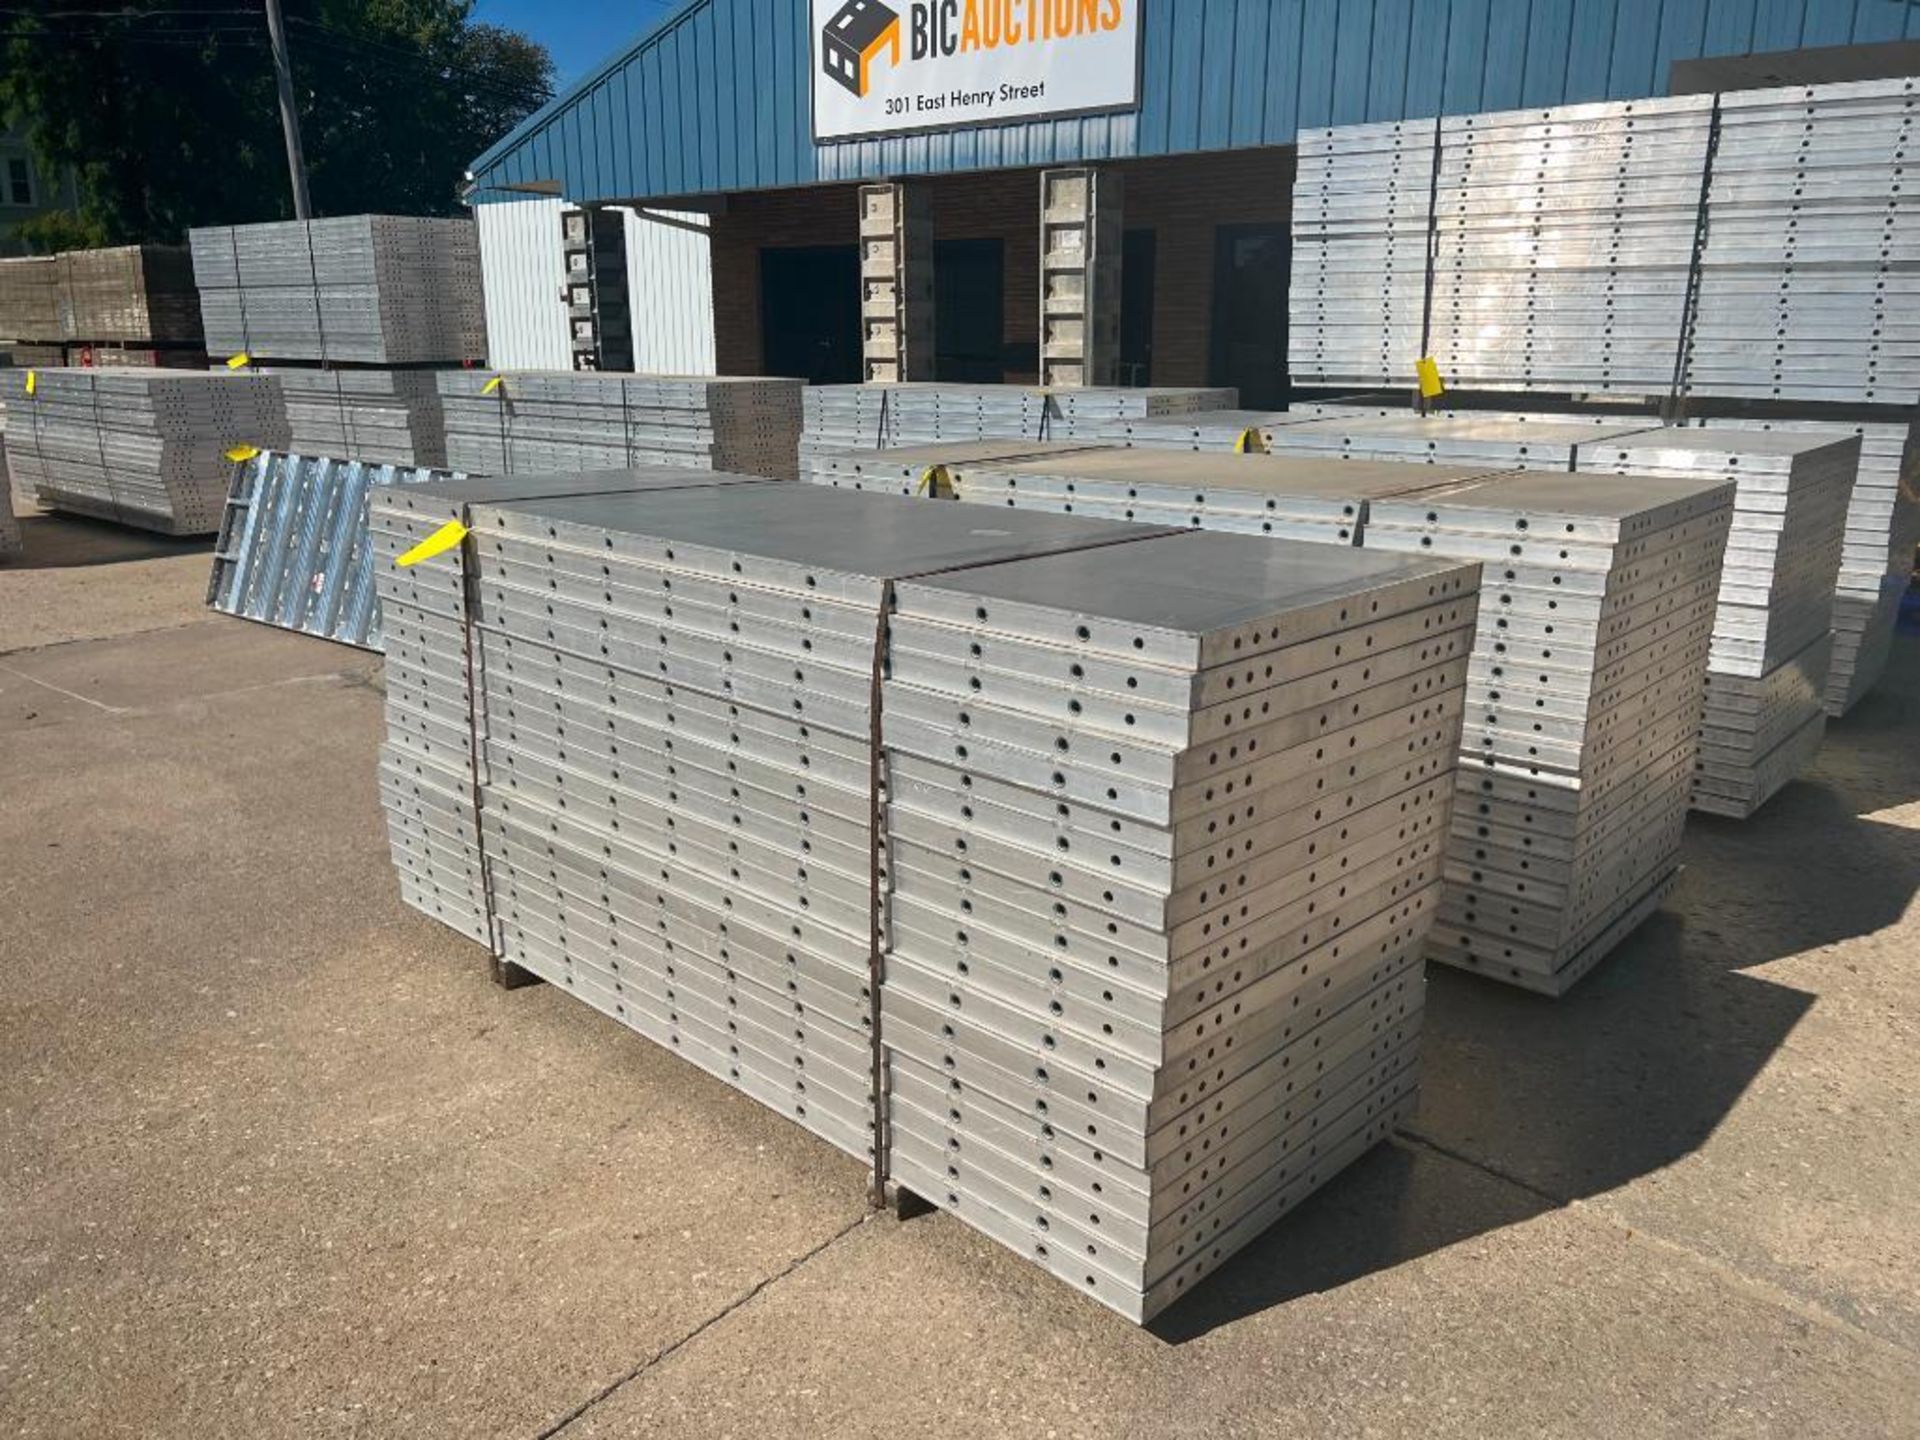 (20) NEW 3' x 8' Wall Ties Aluminum Concrete Forms, 8" Hole Pattern. Located in Mt. Pleasant, IA